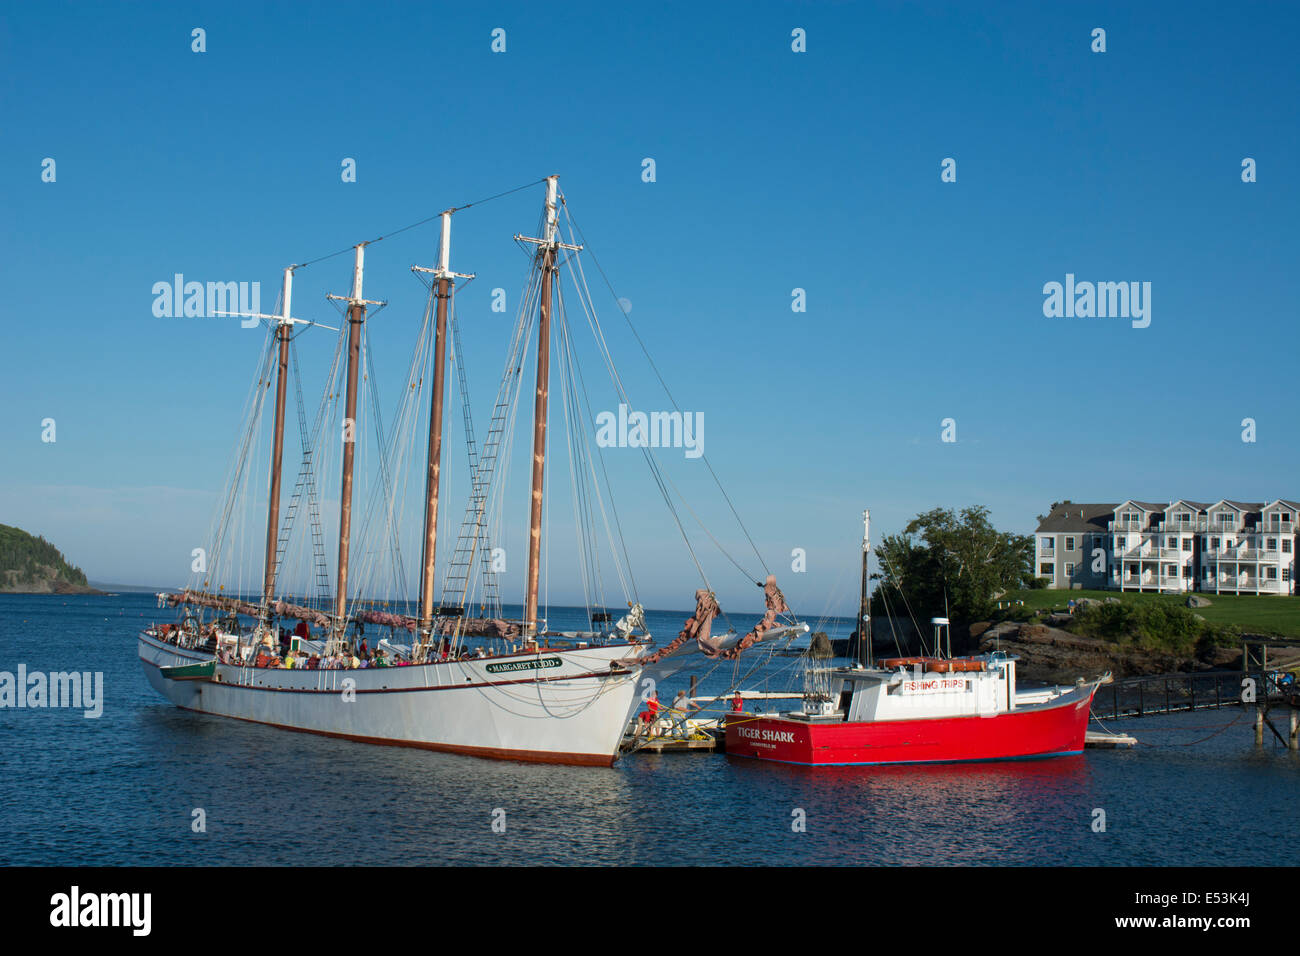 Maine, Bar Harbor. Waterfront view of port area with tourist sightseeing  boat the Margaret Todd, 151-foot four-masted schooner. Stock Photo